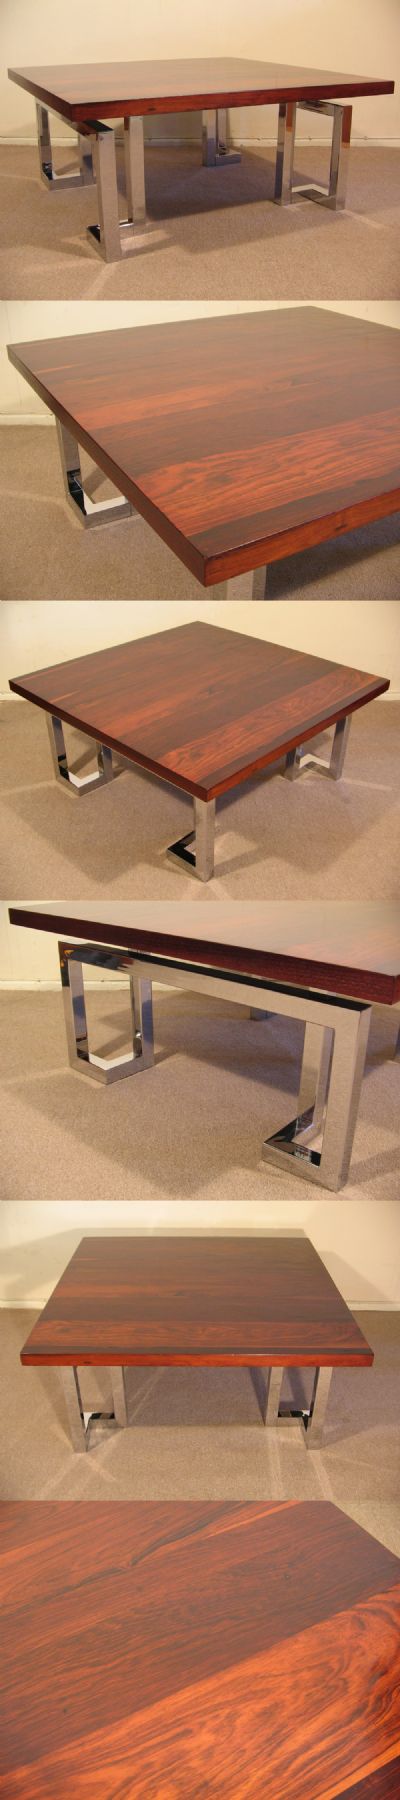 A square 'Mandarin' series, rosewood coffee table by Pieff, England. Standing on heavy chrome leg section with lovely rich grain.